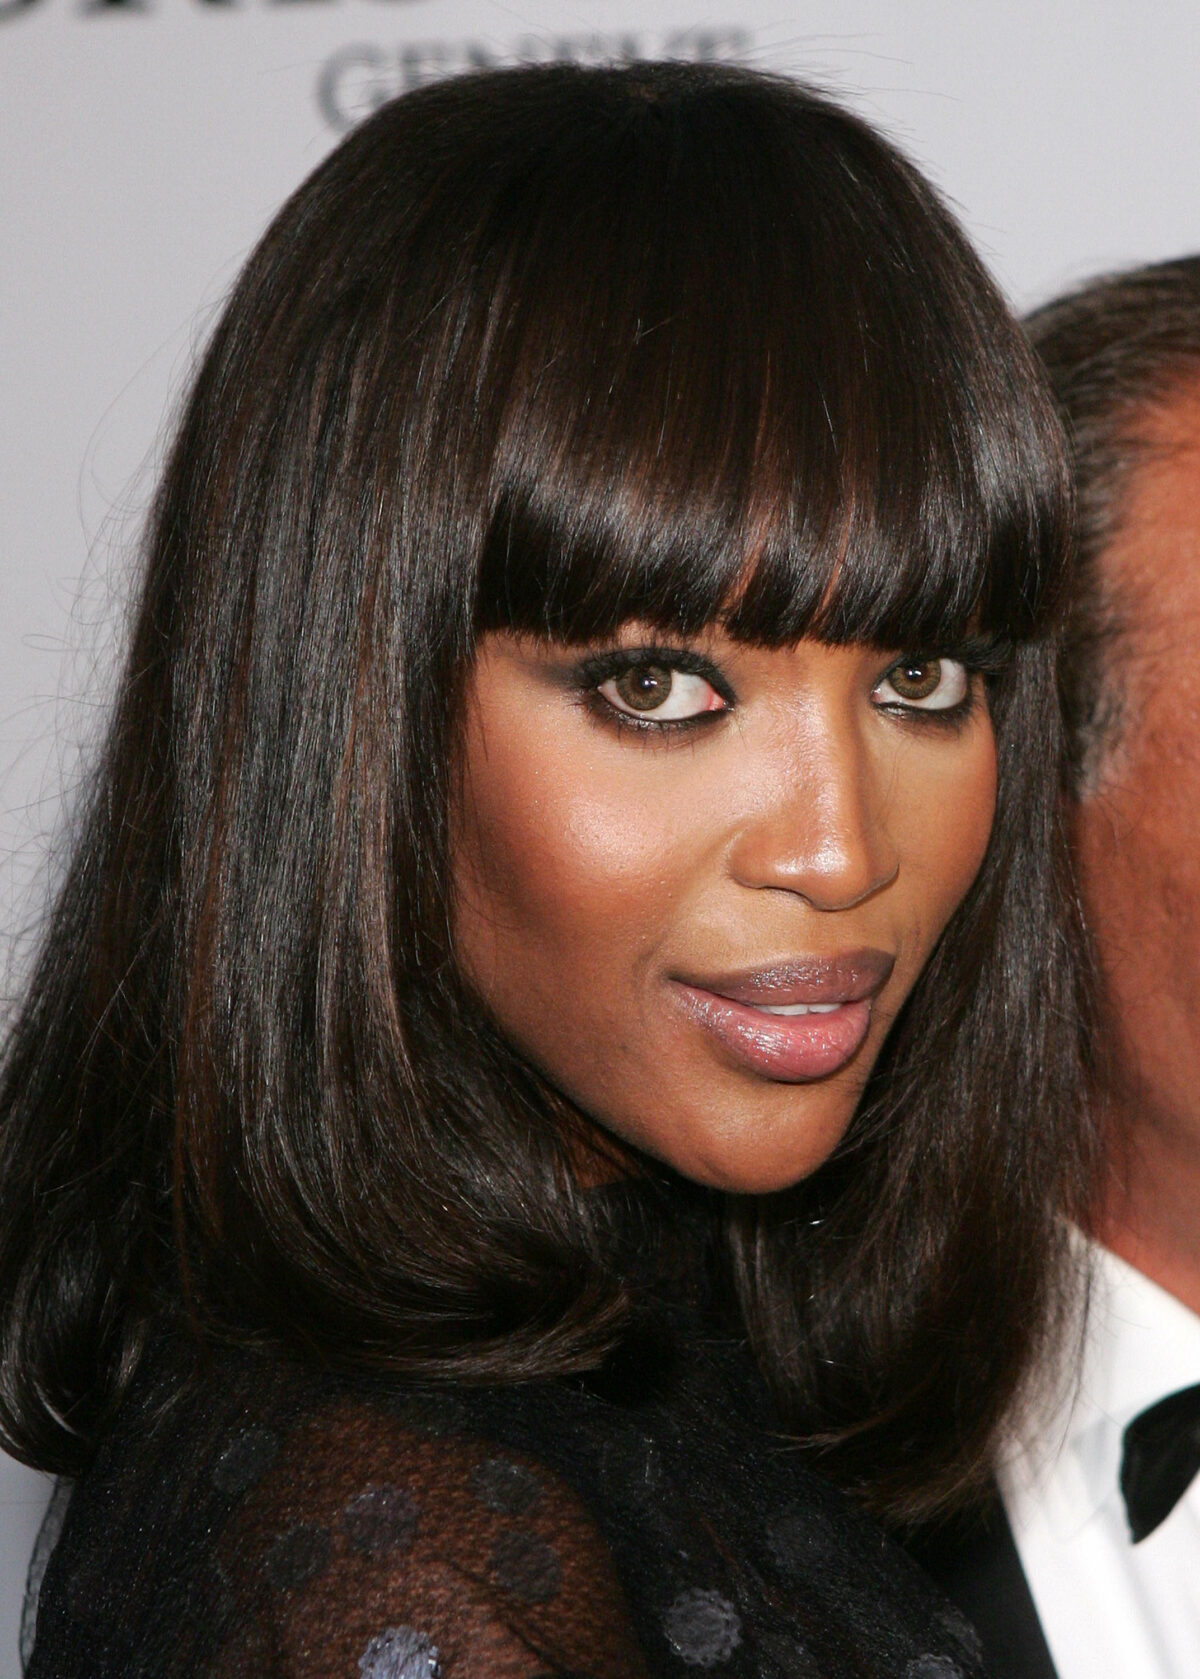 The scintillating Naomi Campbell through the years